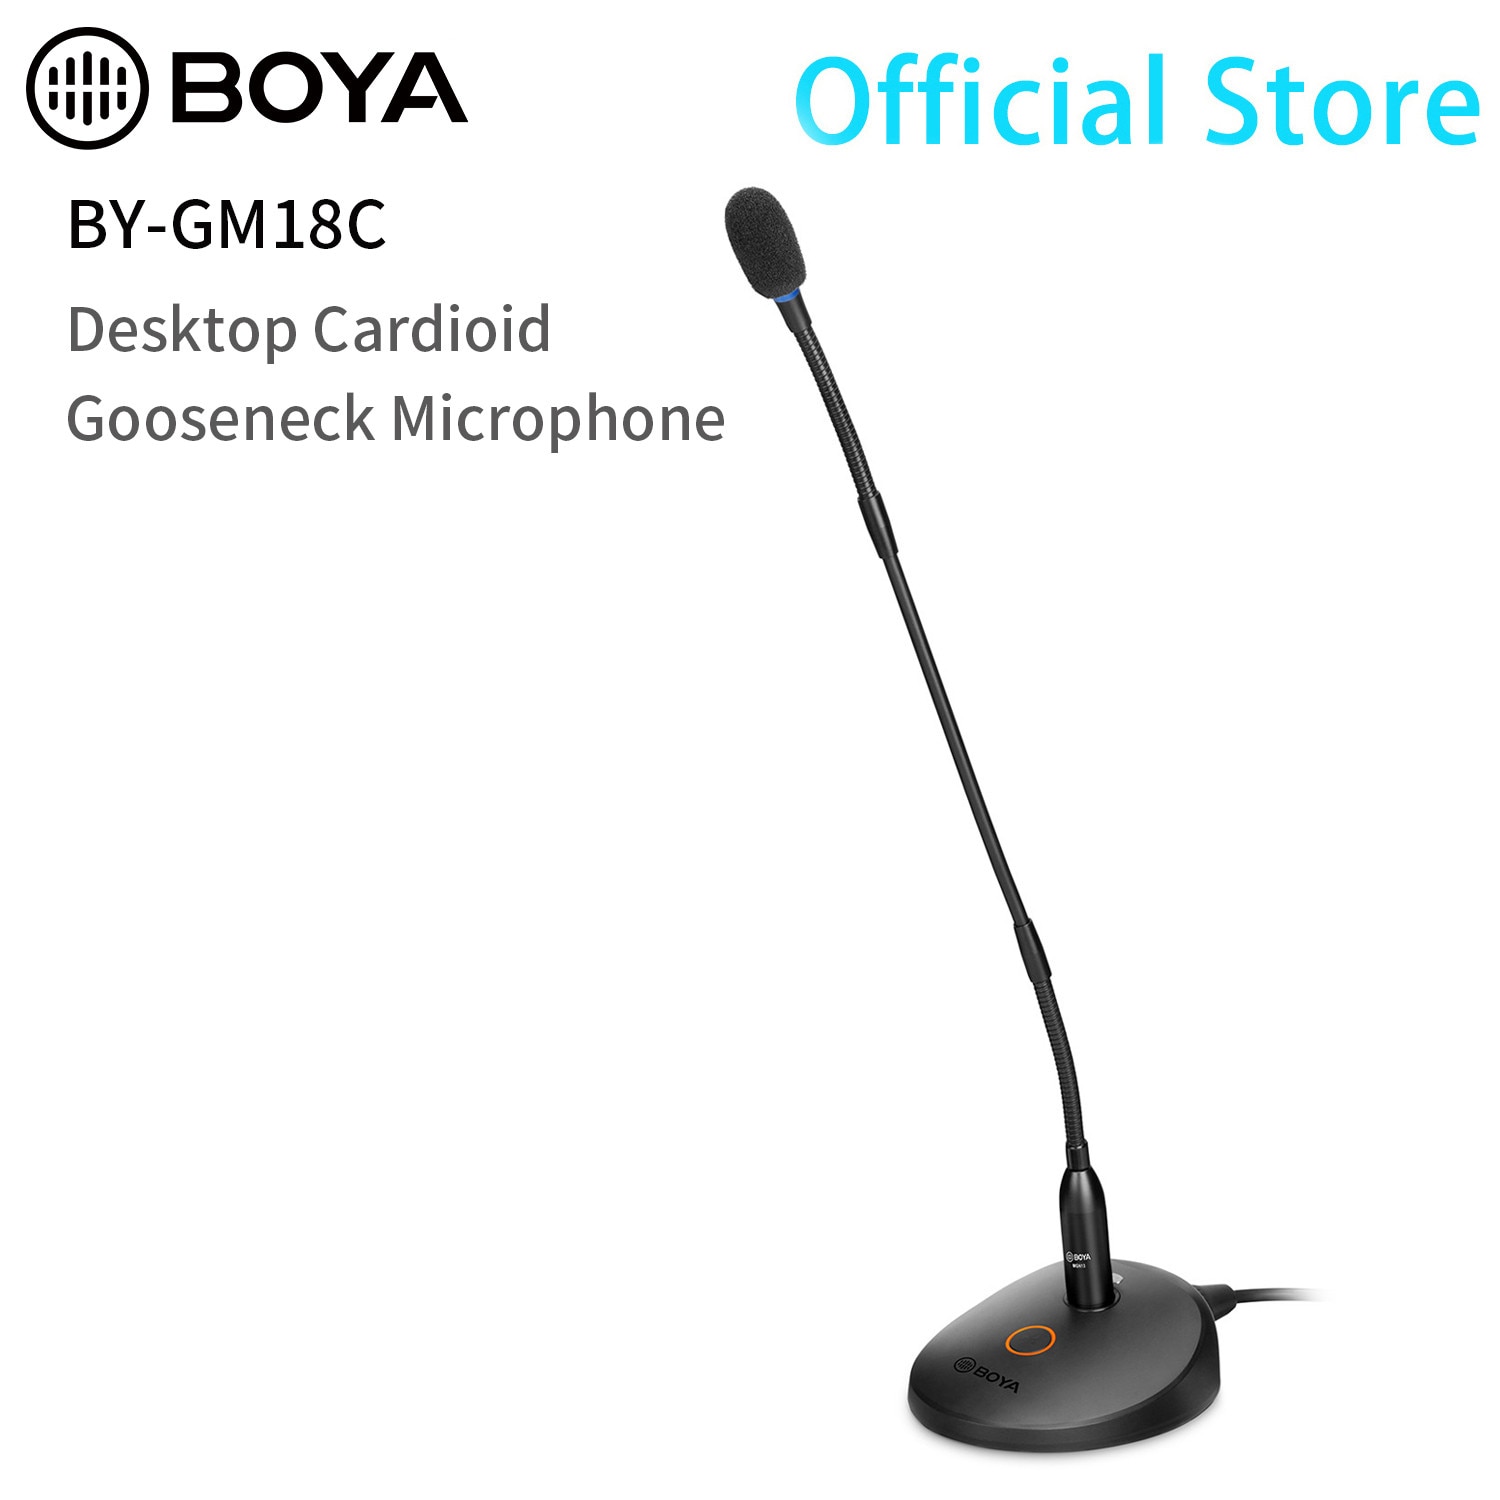 BOYA BY-GM18C Desktop Gooseneck Condenser Microphone 18″ Podium Microphone for Meetings Video Conference Lectures Streaming Mic